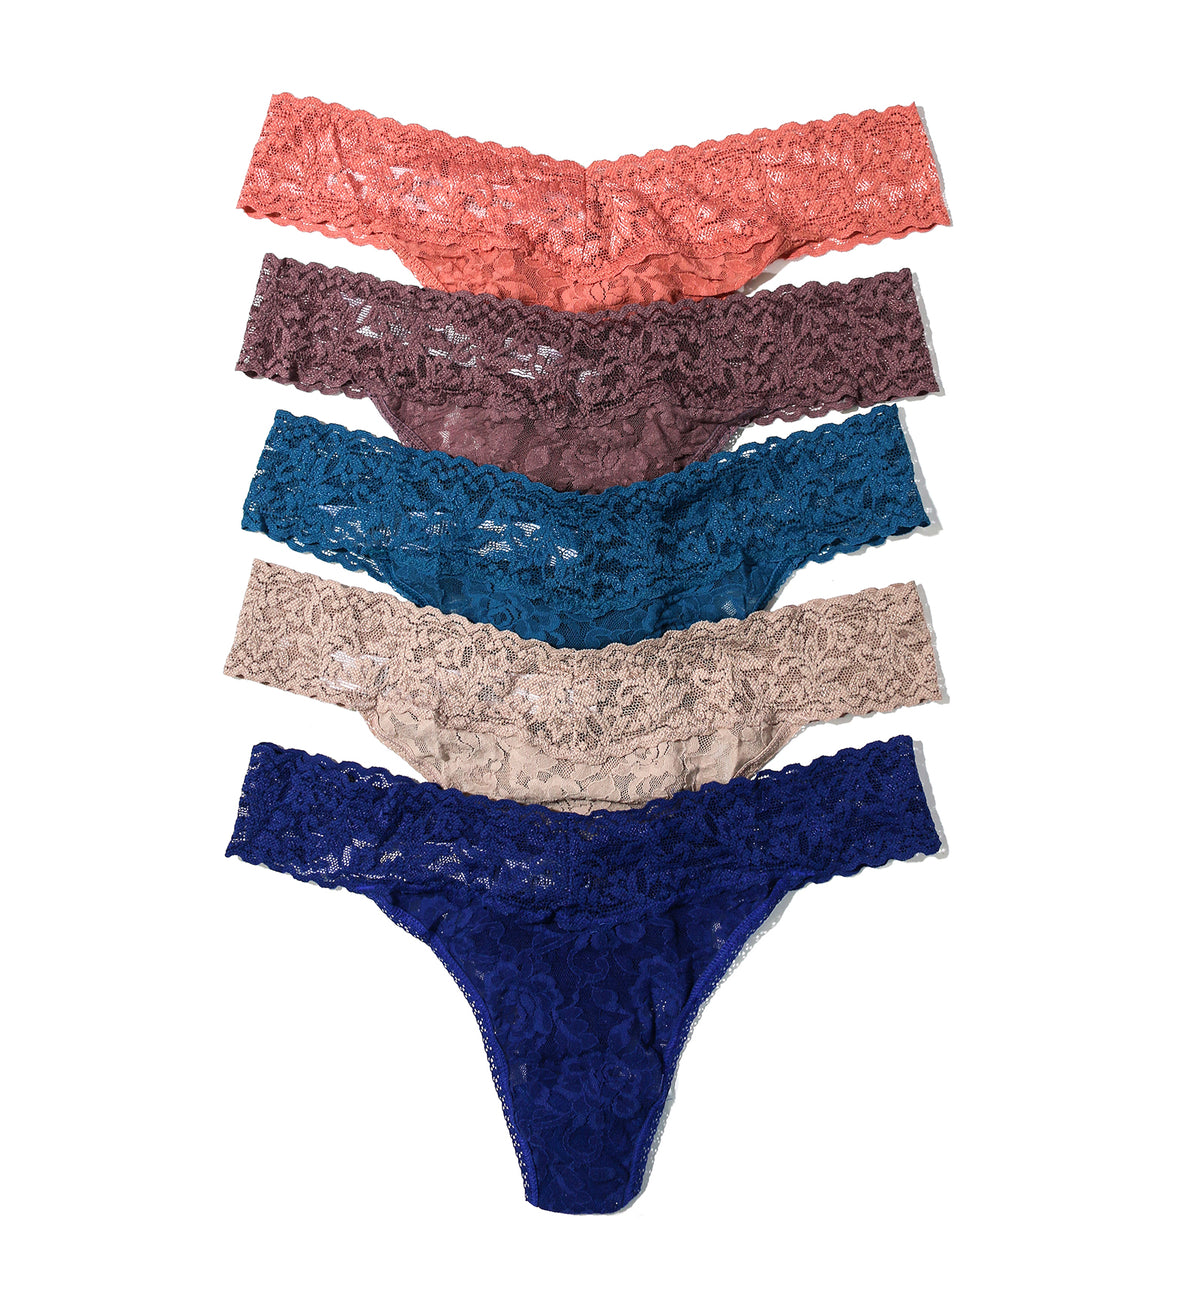 Hanky Panky 5-PACK Signature Lace Low Rise Thong (49115PK),Natural Rhythm - Natural Rhythm,One Size